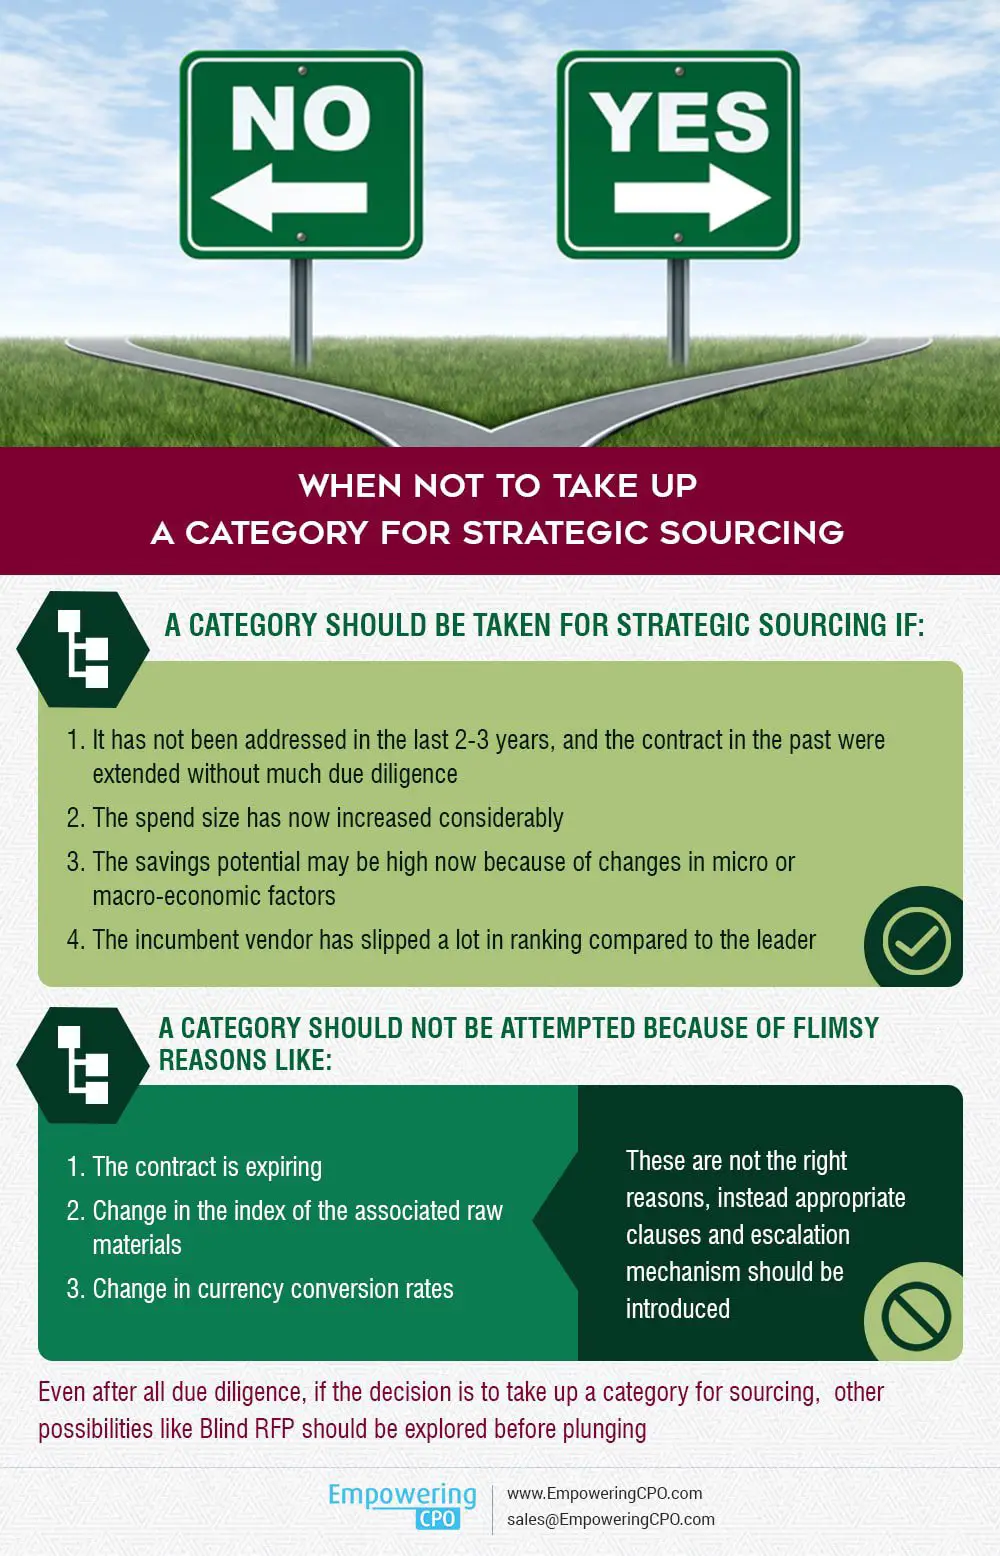 Infographic discussing criteria for and against taking up a category for strategic sourcing, emphasizing due diligence and exploring alternatives.